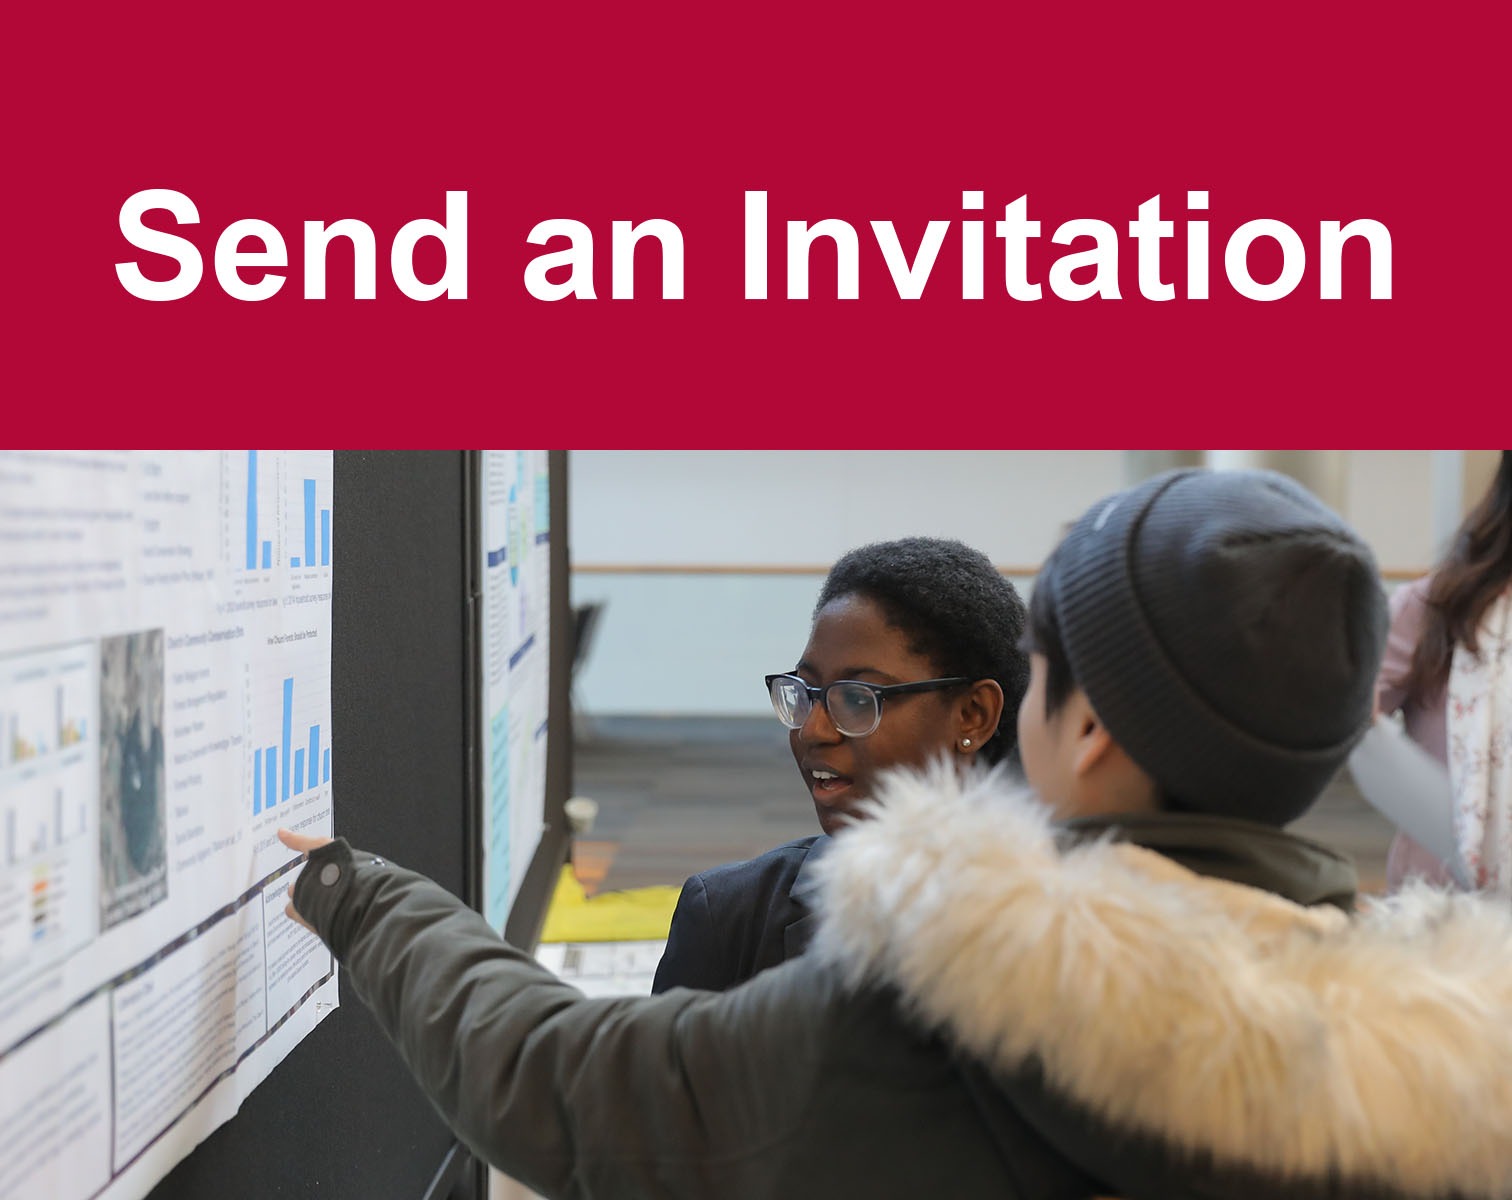 Send an Invitation image with two people talking